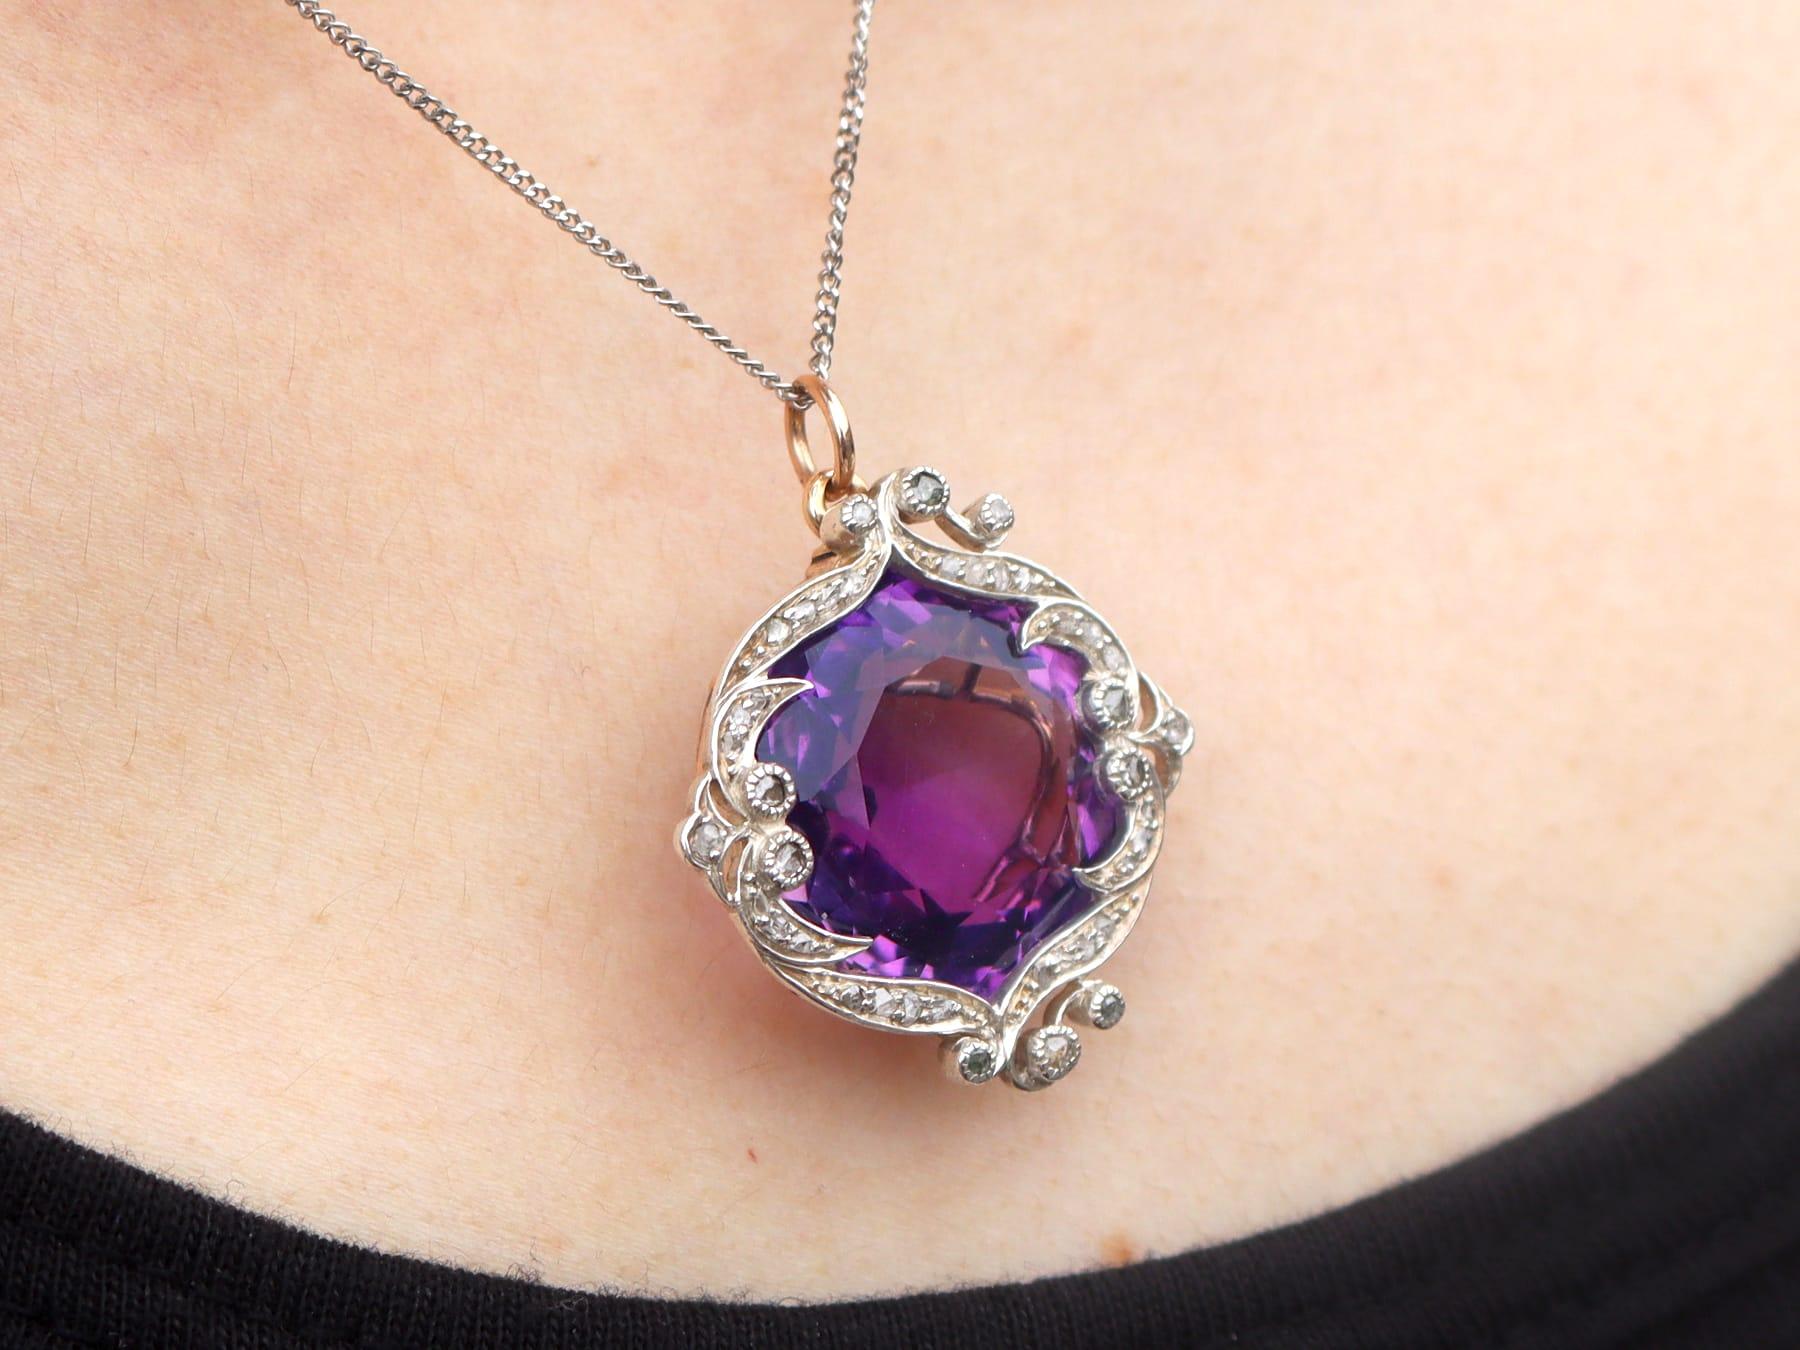 Antique Victorian Amethyst Diamond 9k Yellow Gold Pendant In Excellent Condition For Sale In Jesmond, Newcastle Upon Tyne